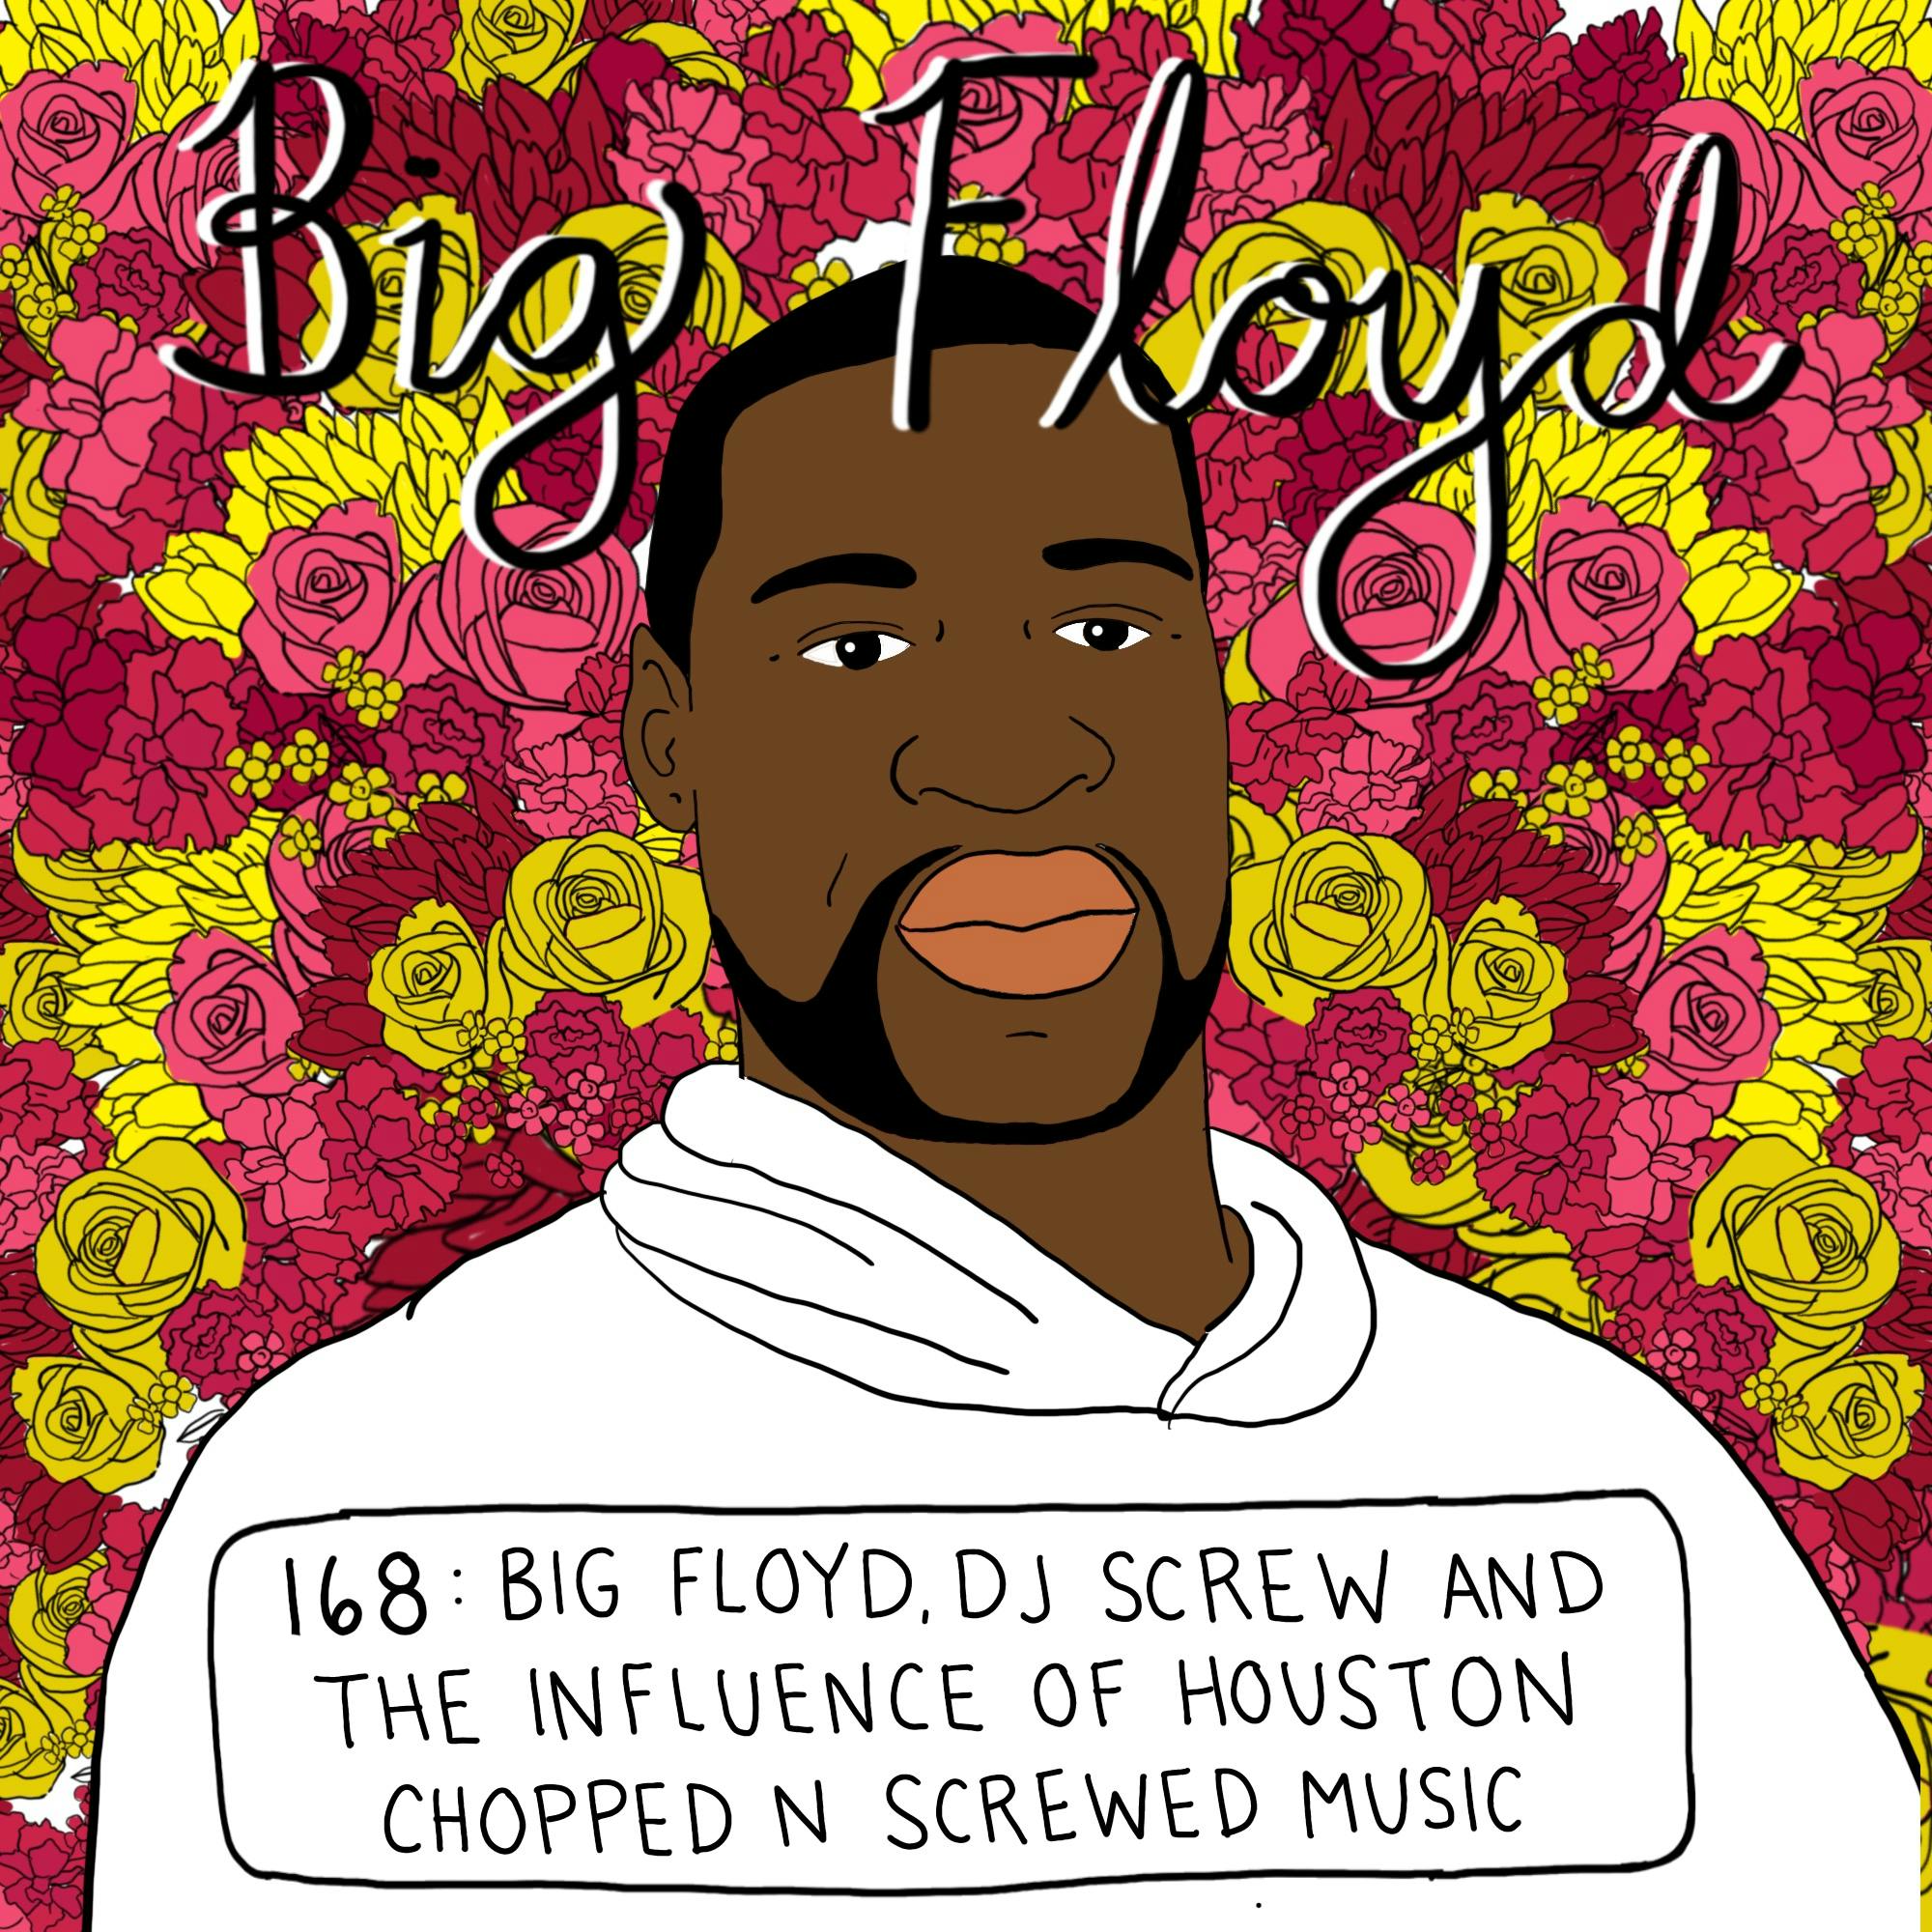 Big Floyd And The Influence Of Houston Chopped N Screwed Music